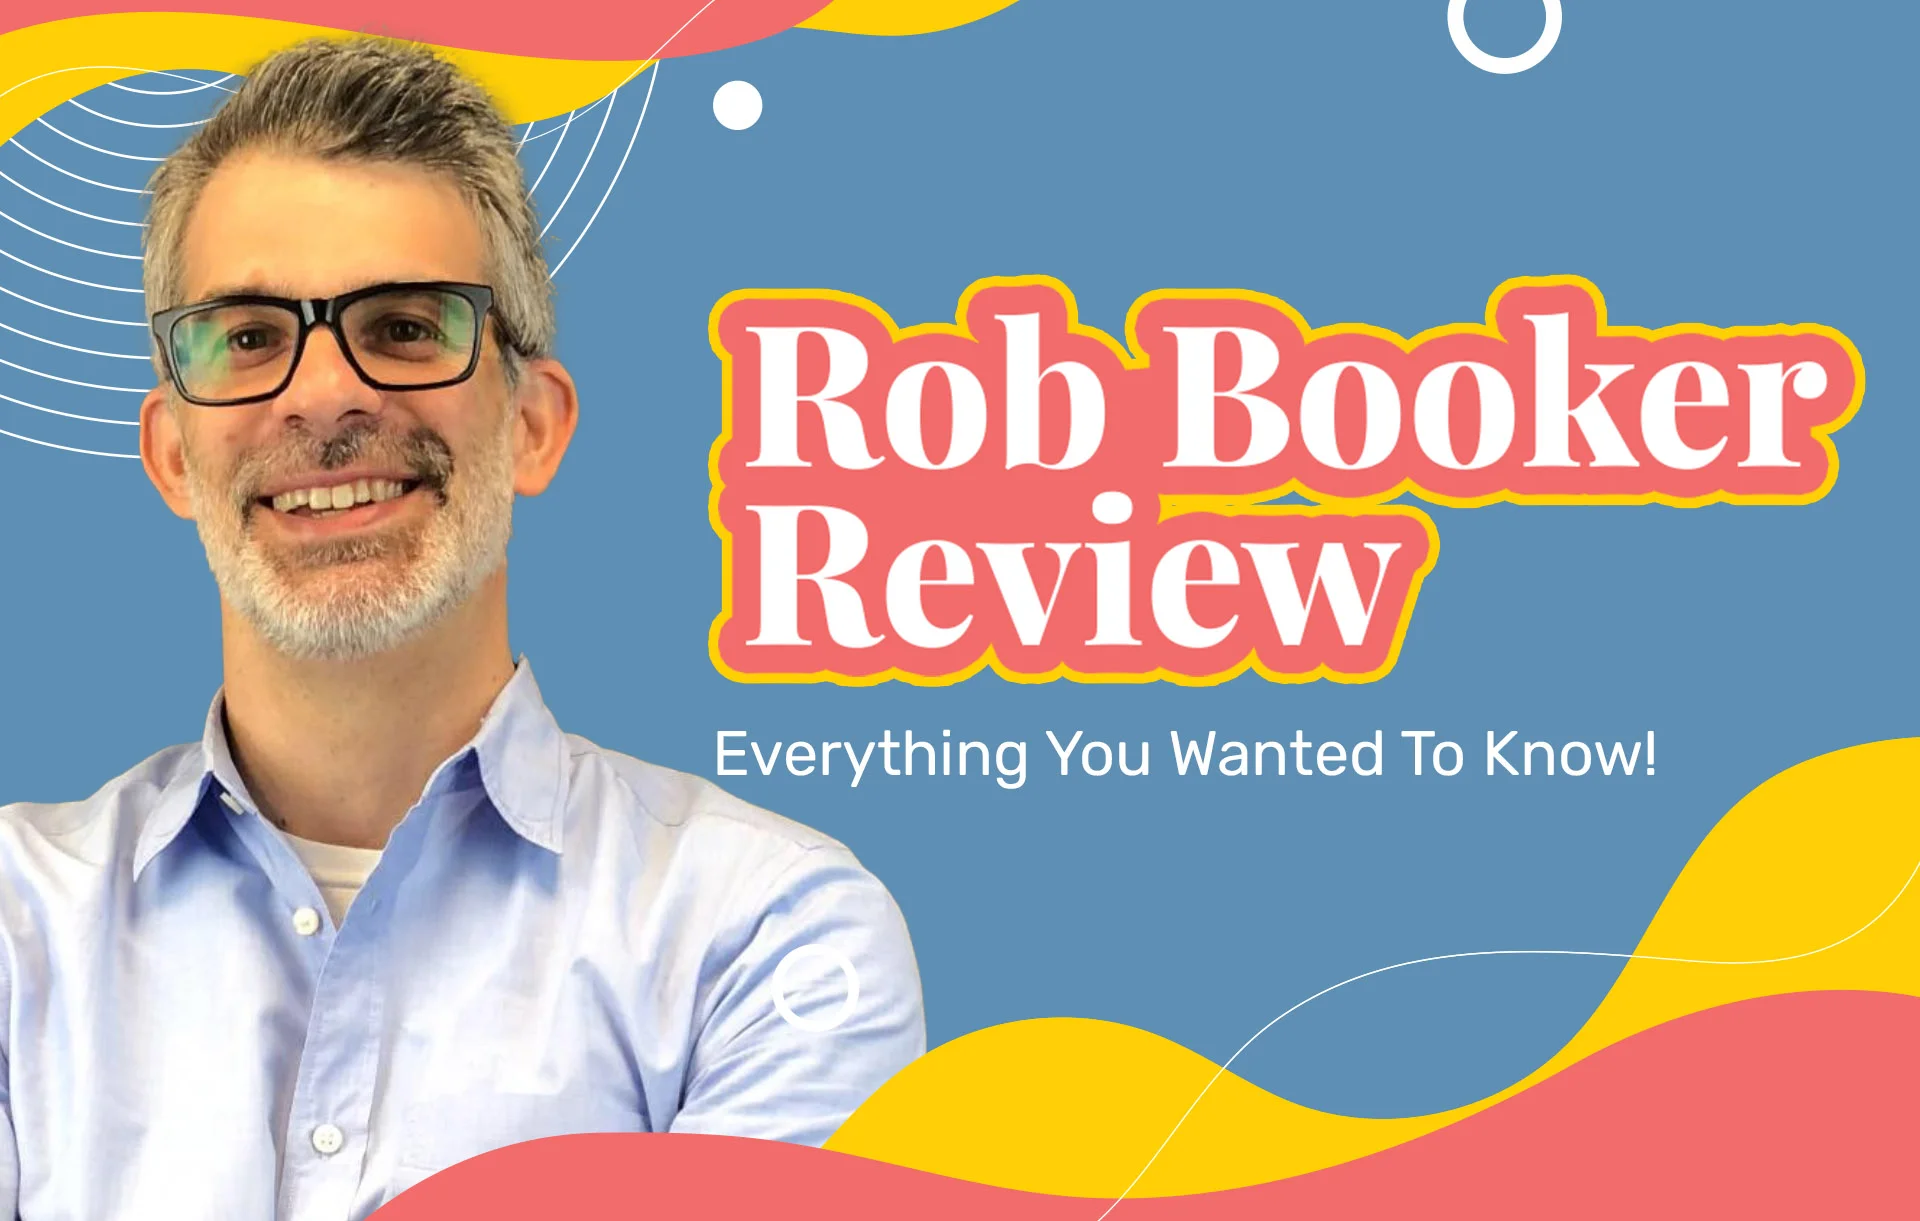 Rob Booker Review